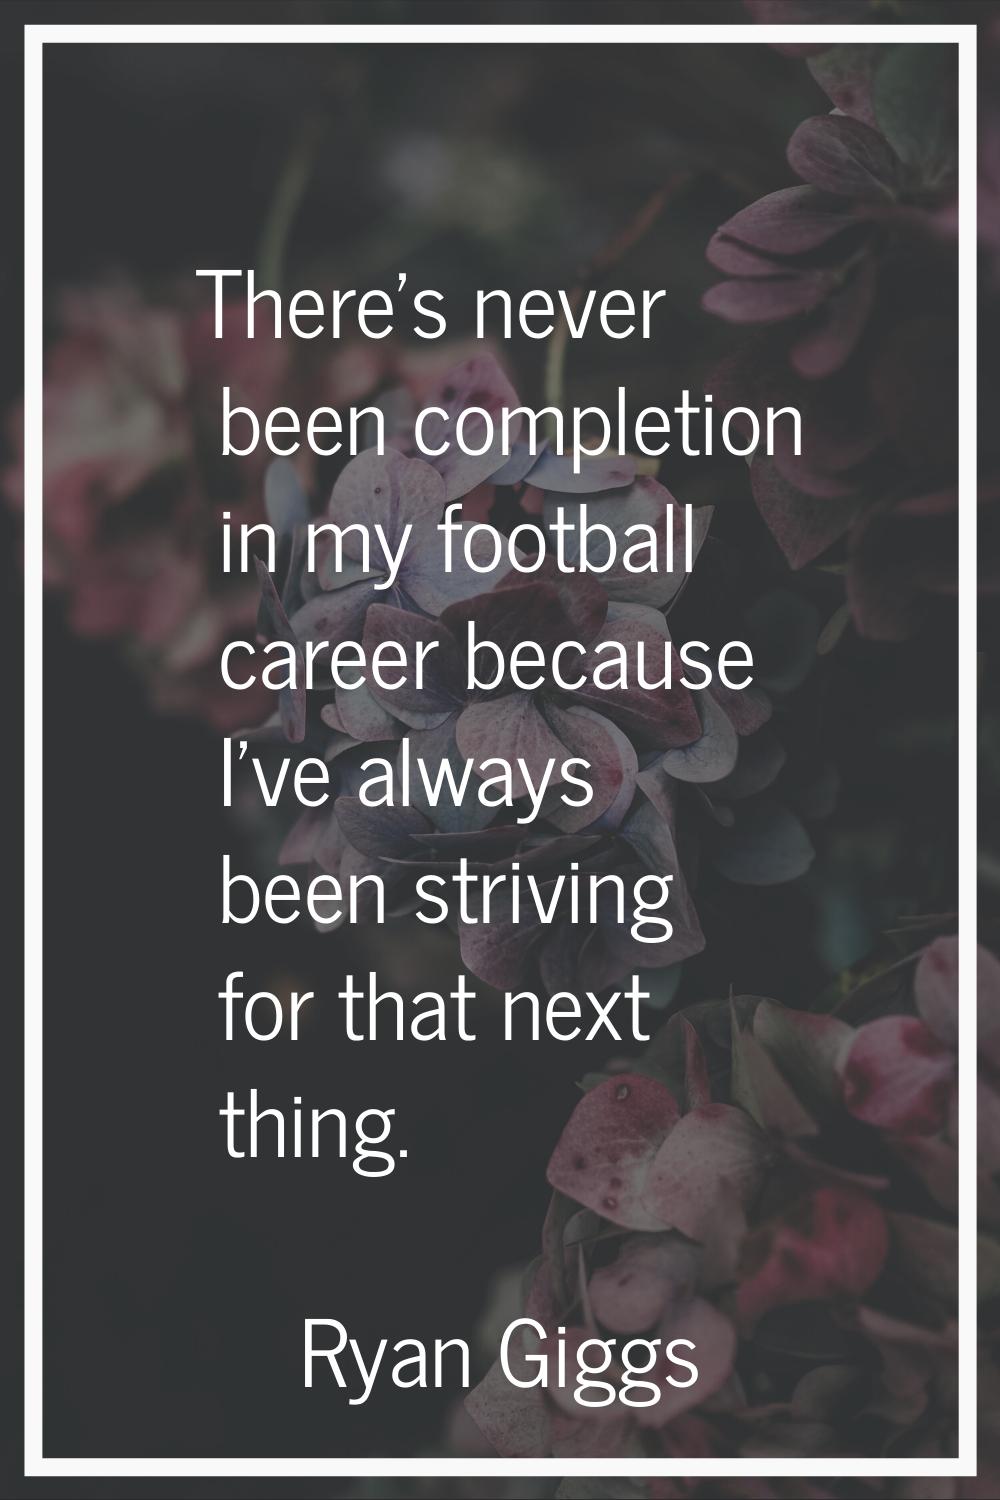 There's never been completion in my football career because I've always been striving for that next